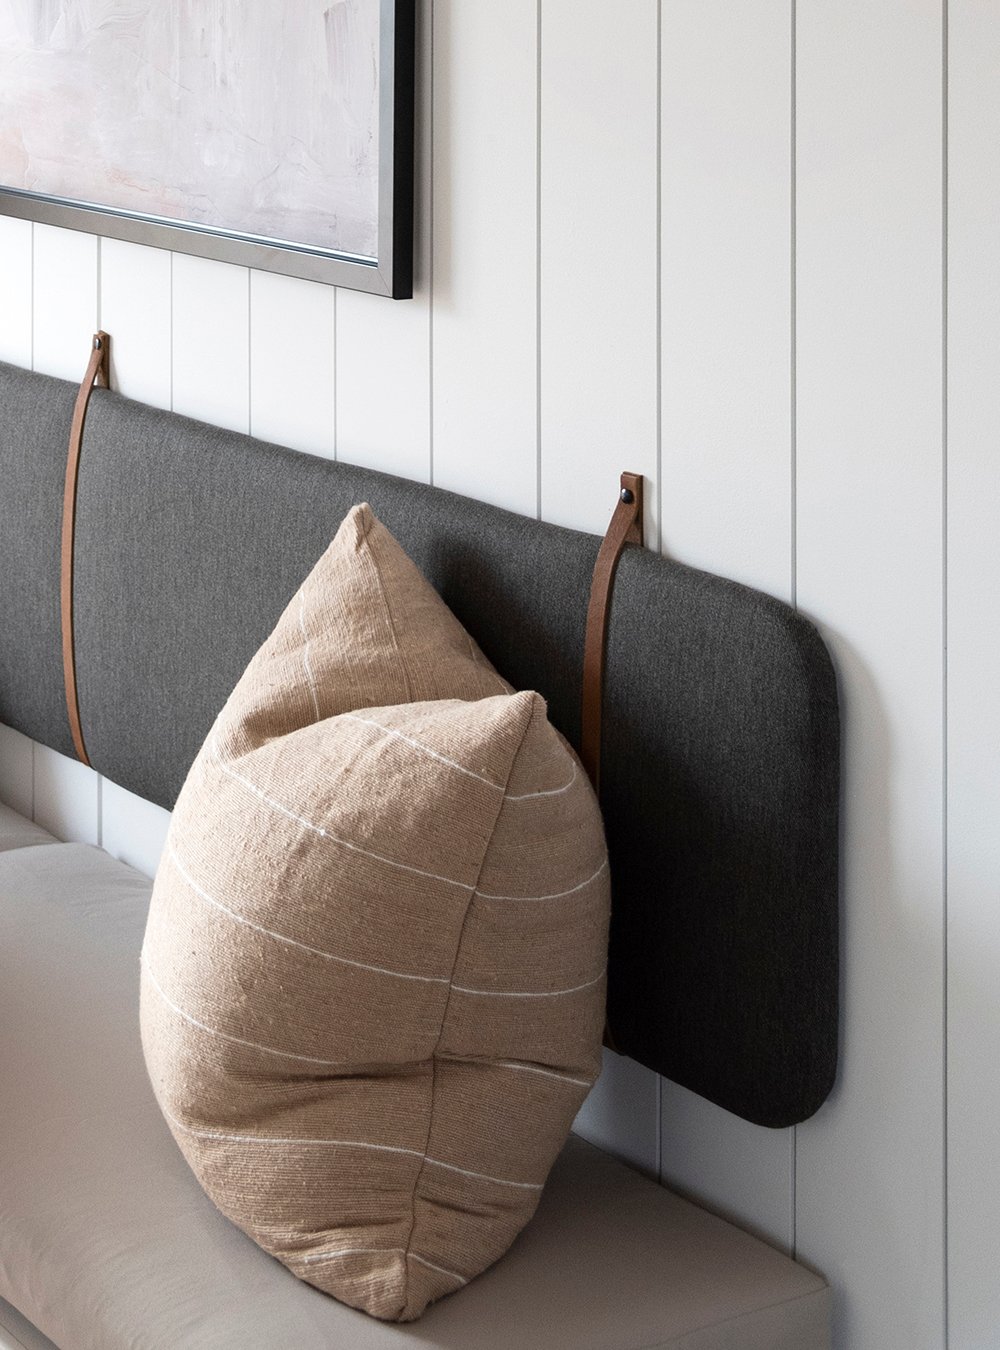 Banquette (or Headboard) DIY Back Cushion - roomfortuesday.com